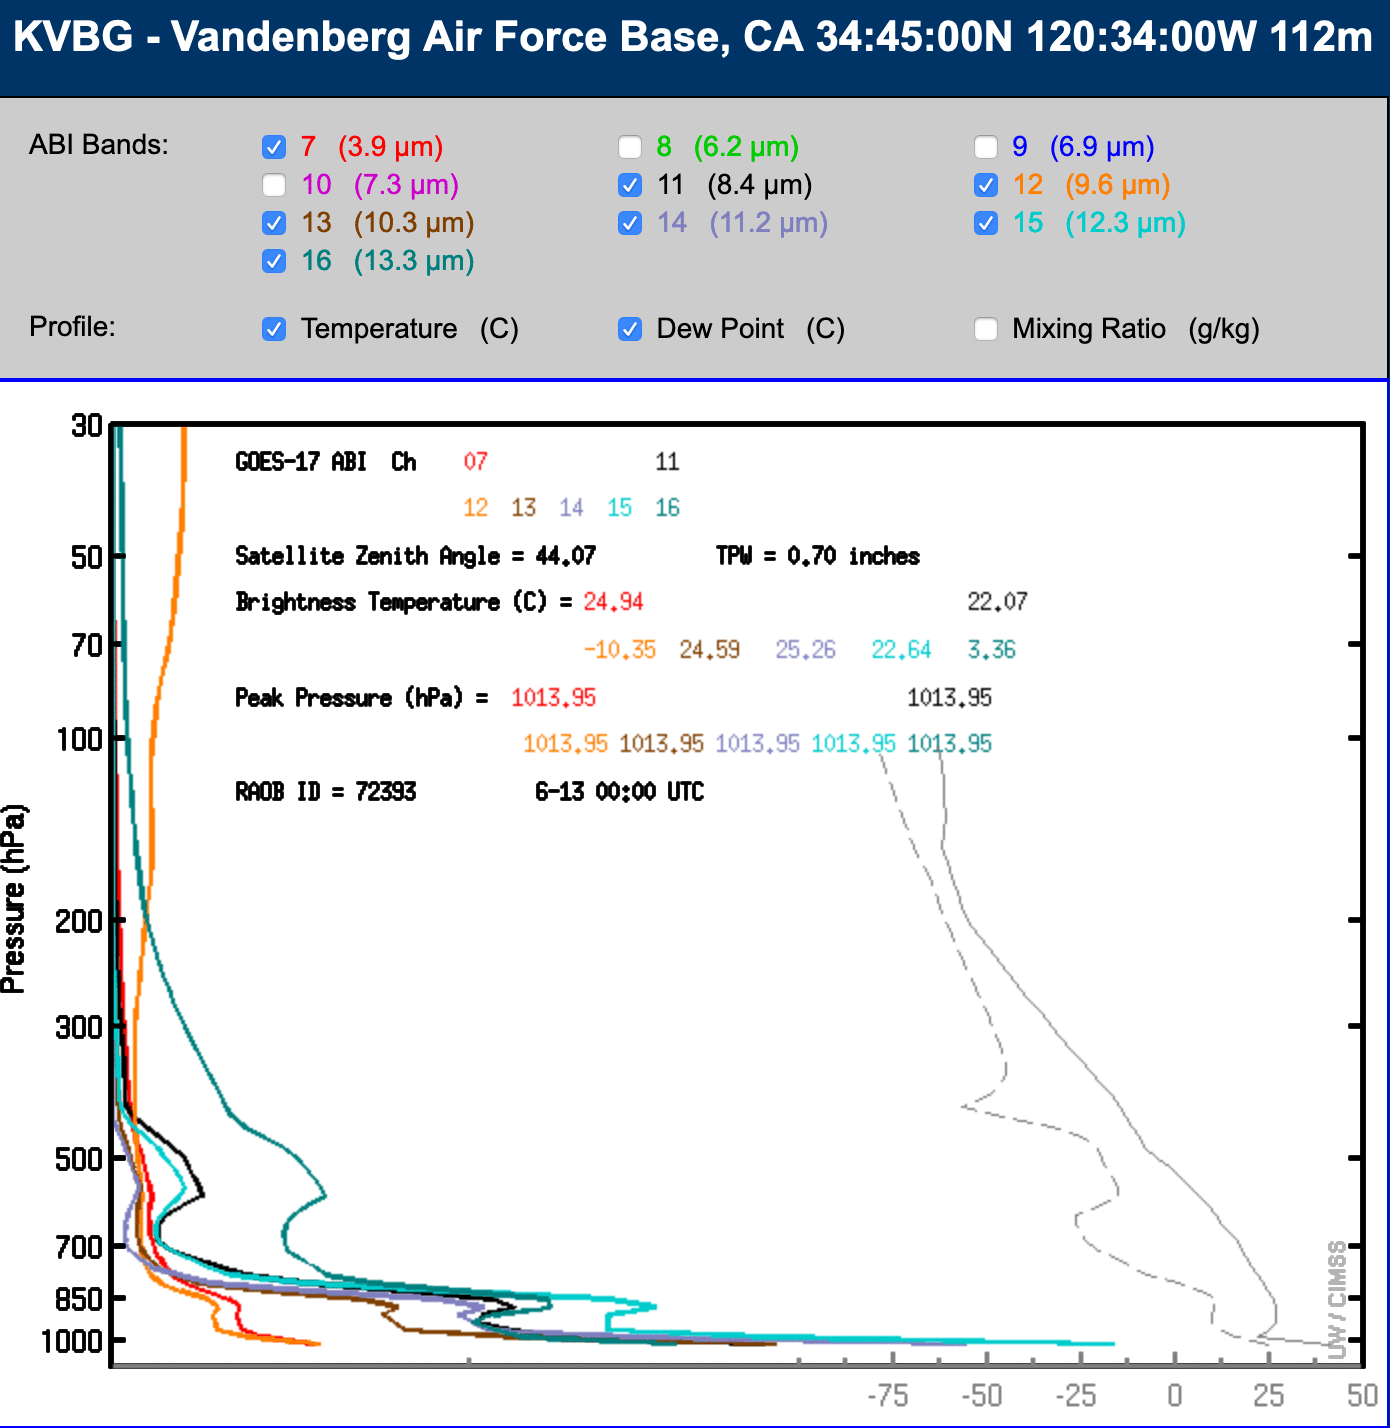 Infrared and Water Vapor weighting functions calculated using rawinsonde data from Vandenberg CA at 00 T on 13 June [click to enlarge]